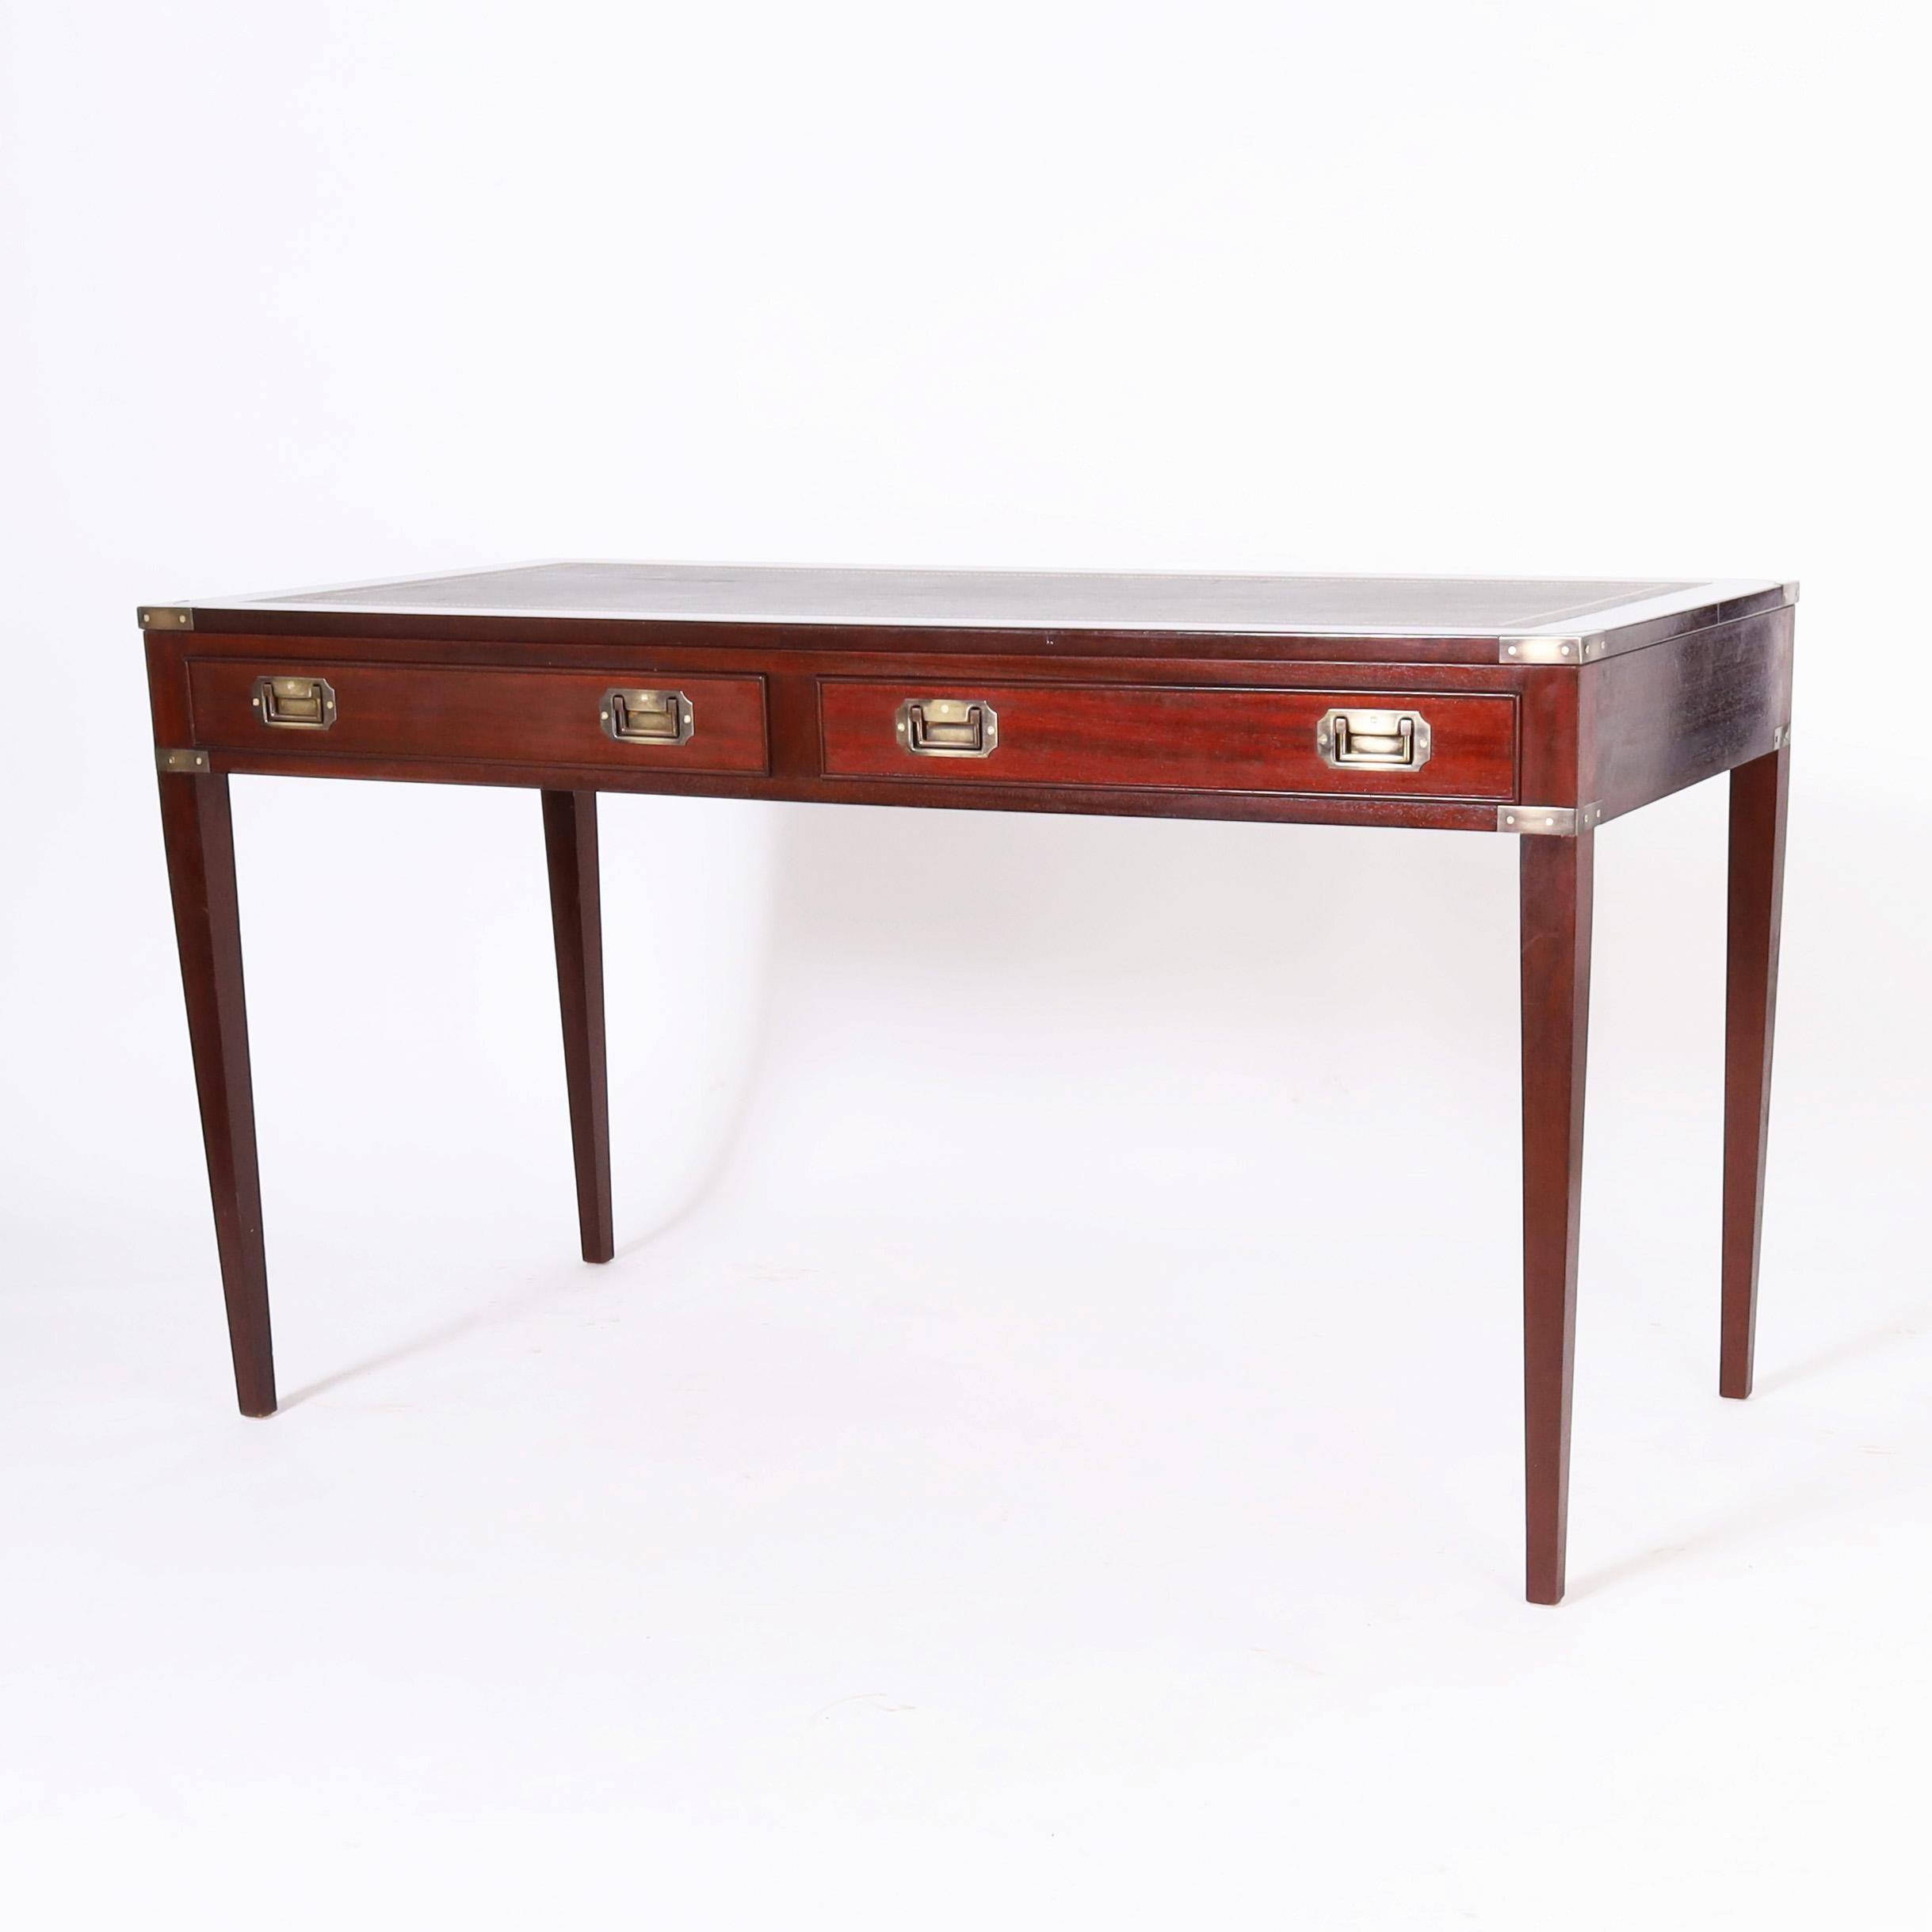 Hand-Crafted English Leather Top Campaign Style Desk For Sale